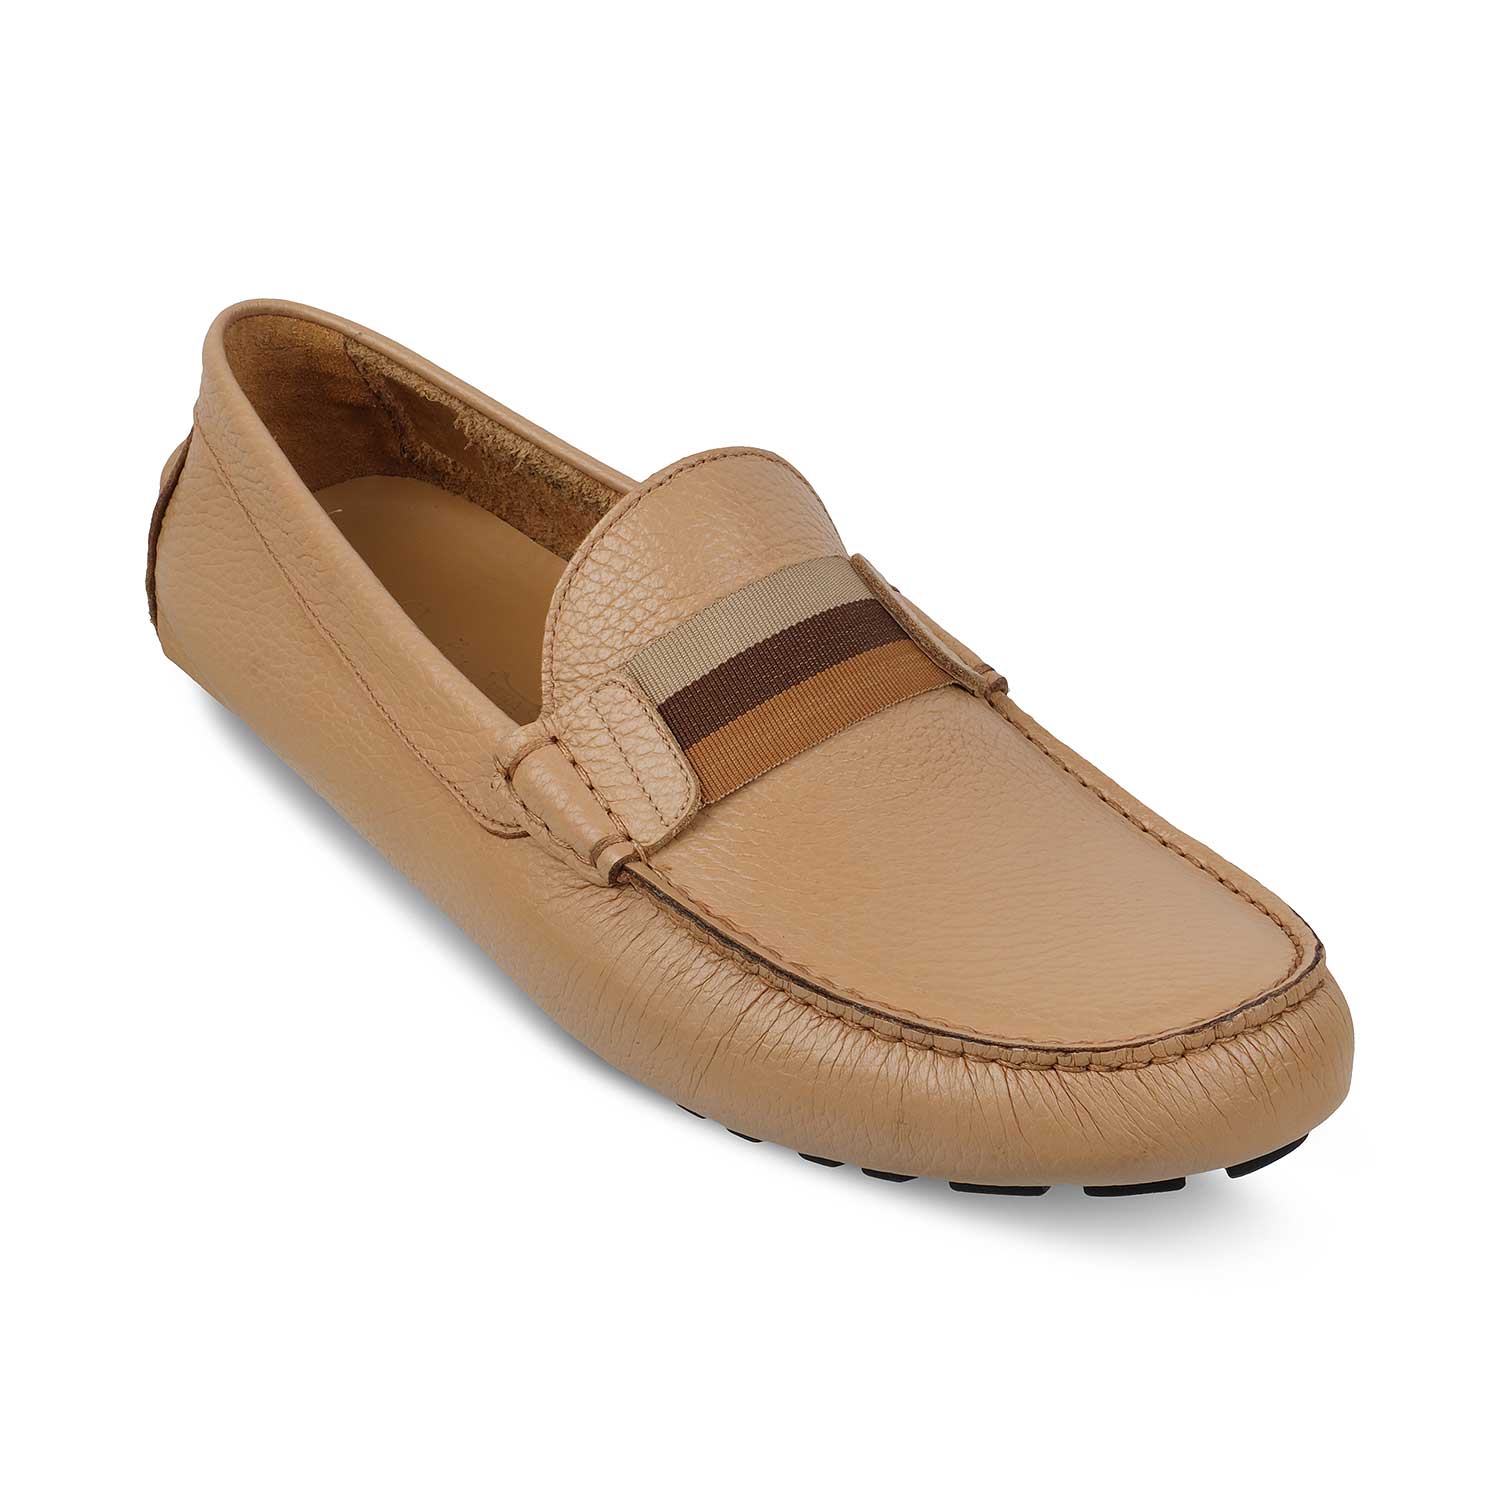 The Macario Beige Men's Handcrafted Leather Driving Loafers Tresmode - Tresmode